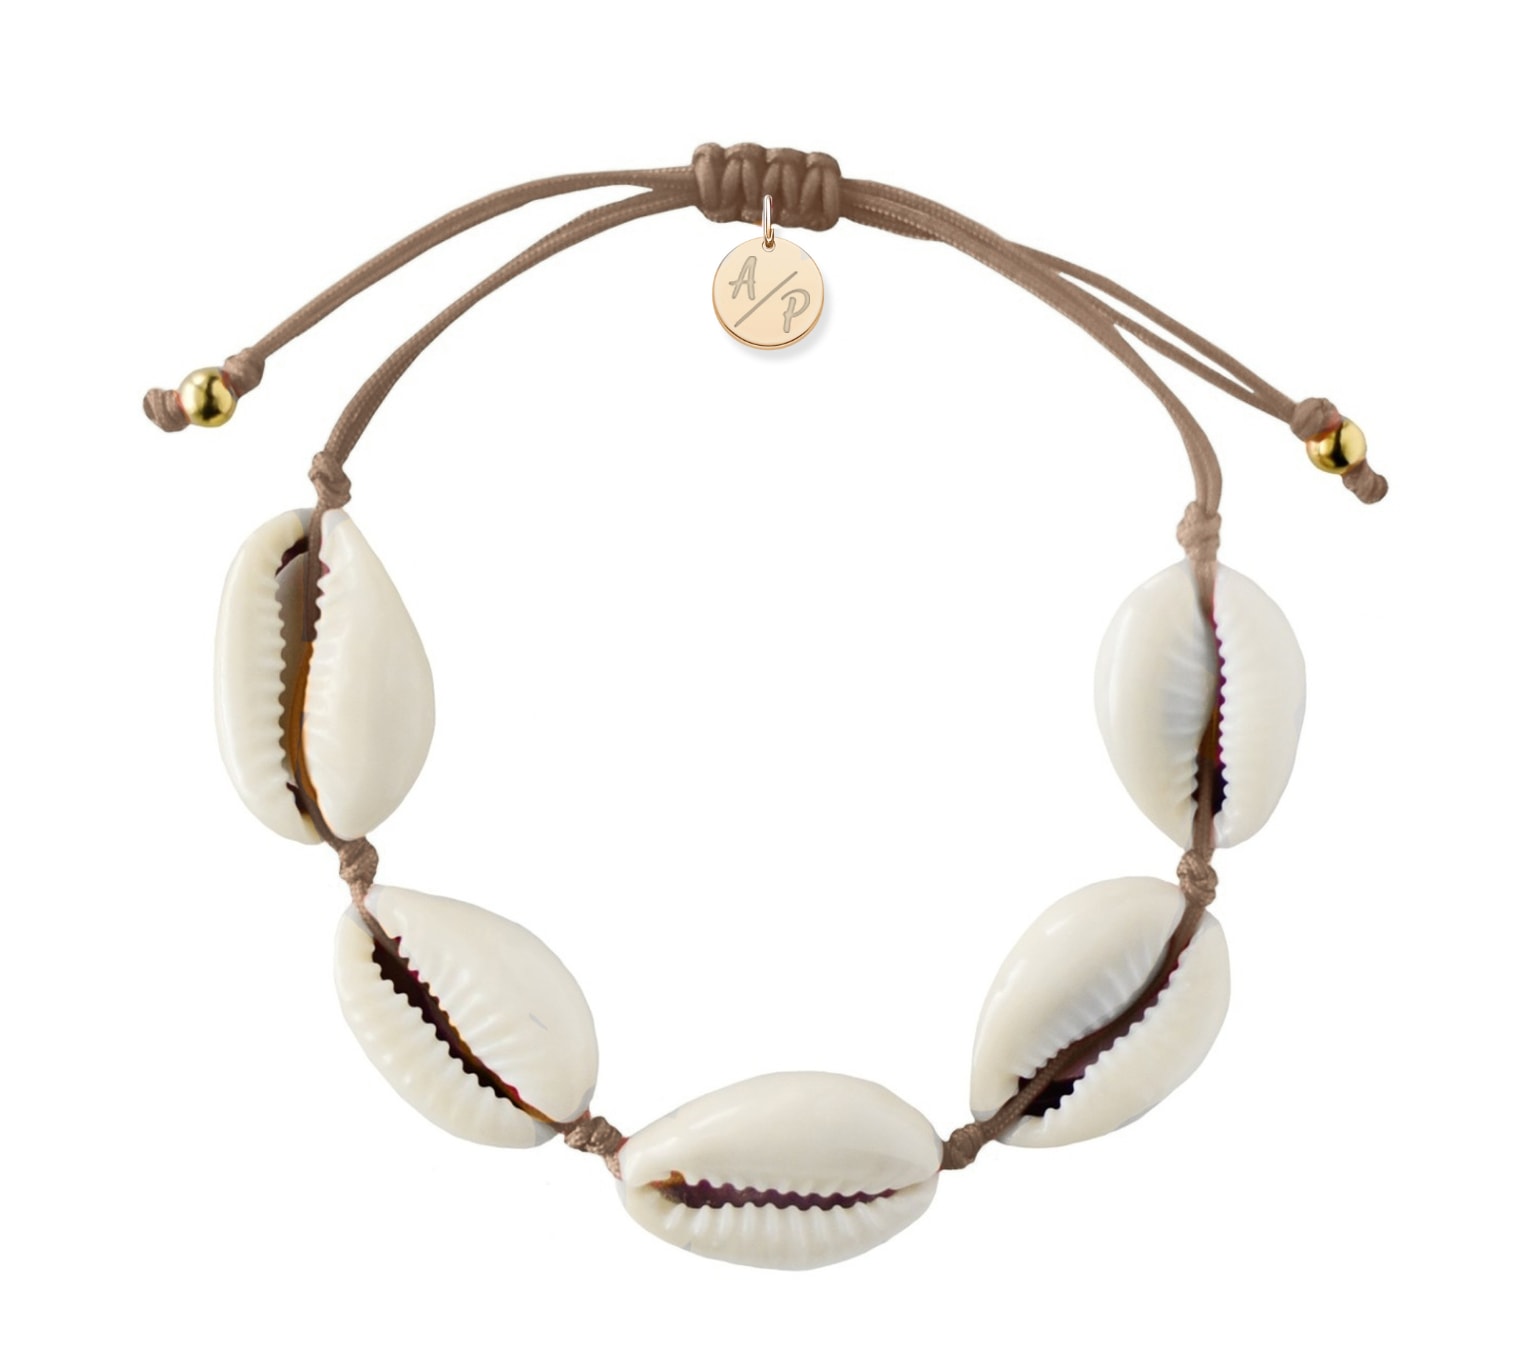 Women’s Brown Natural Shell Adjustable Bracelet On Colored Cord - Cappuccino Adriana Pappas Designs